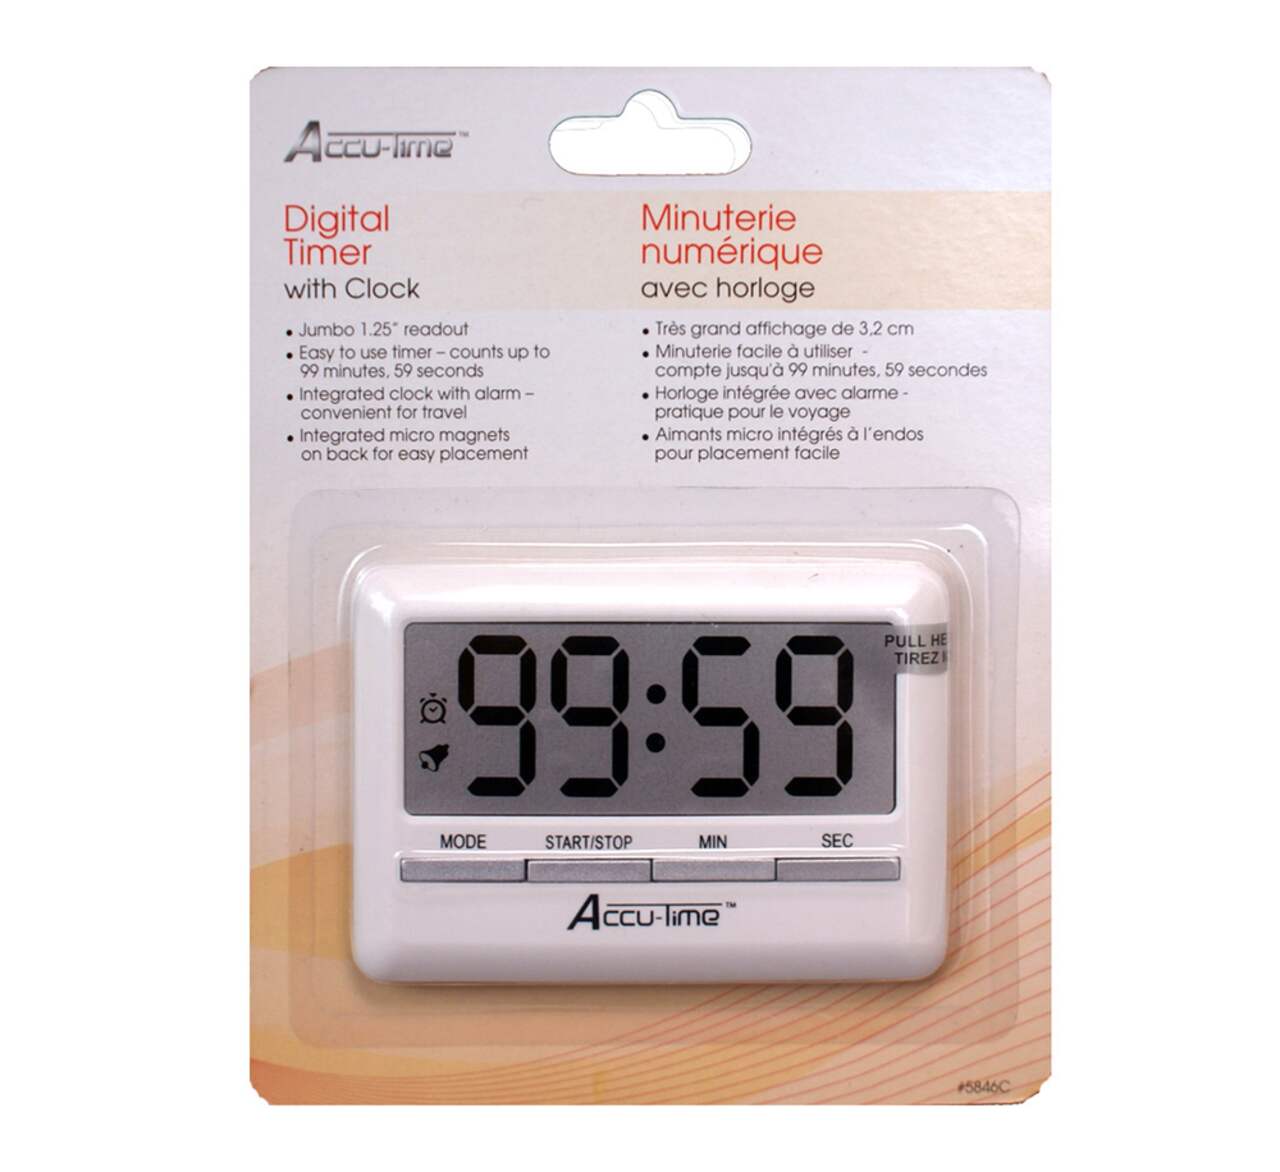 https://media-www.canadiantire.ca/product/living/kitchen/kitchen-tools-thermometers/1425476/digital-timer-with-clock-ddc72b17-ab79-412b-b6b9-1600d7c27b5f.png?imdensity=1&imwidth=640&impolicy=mZoom